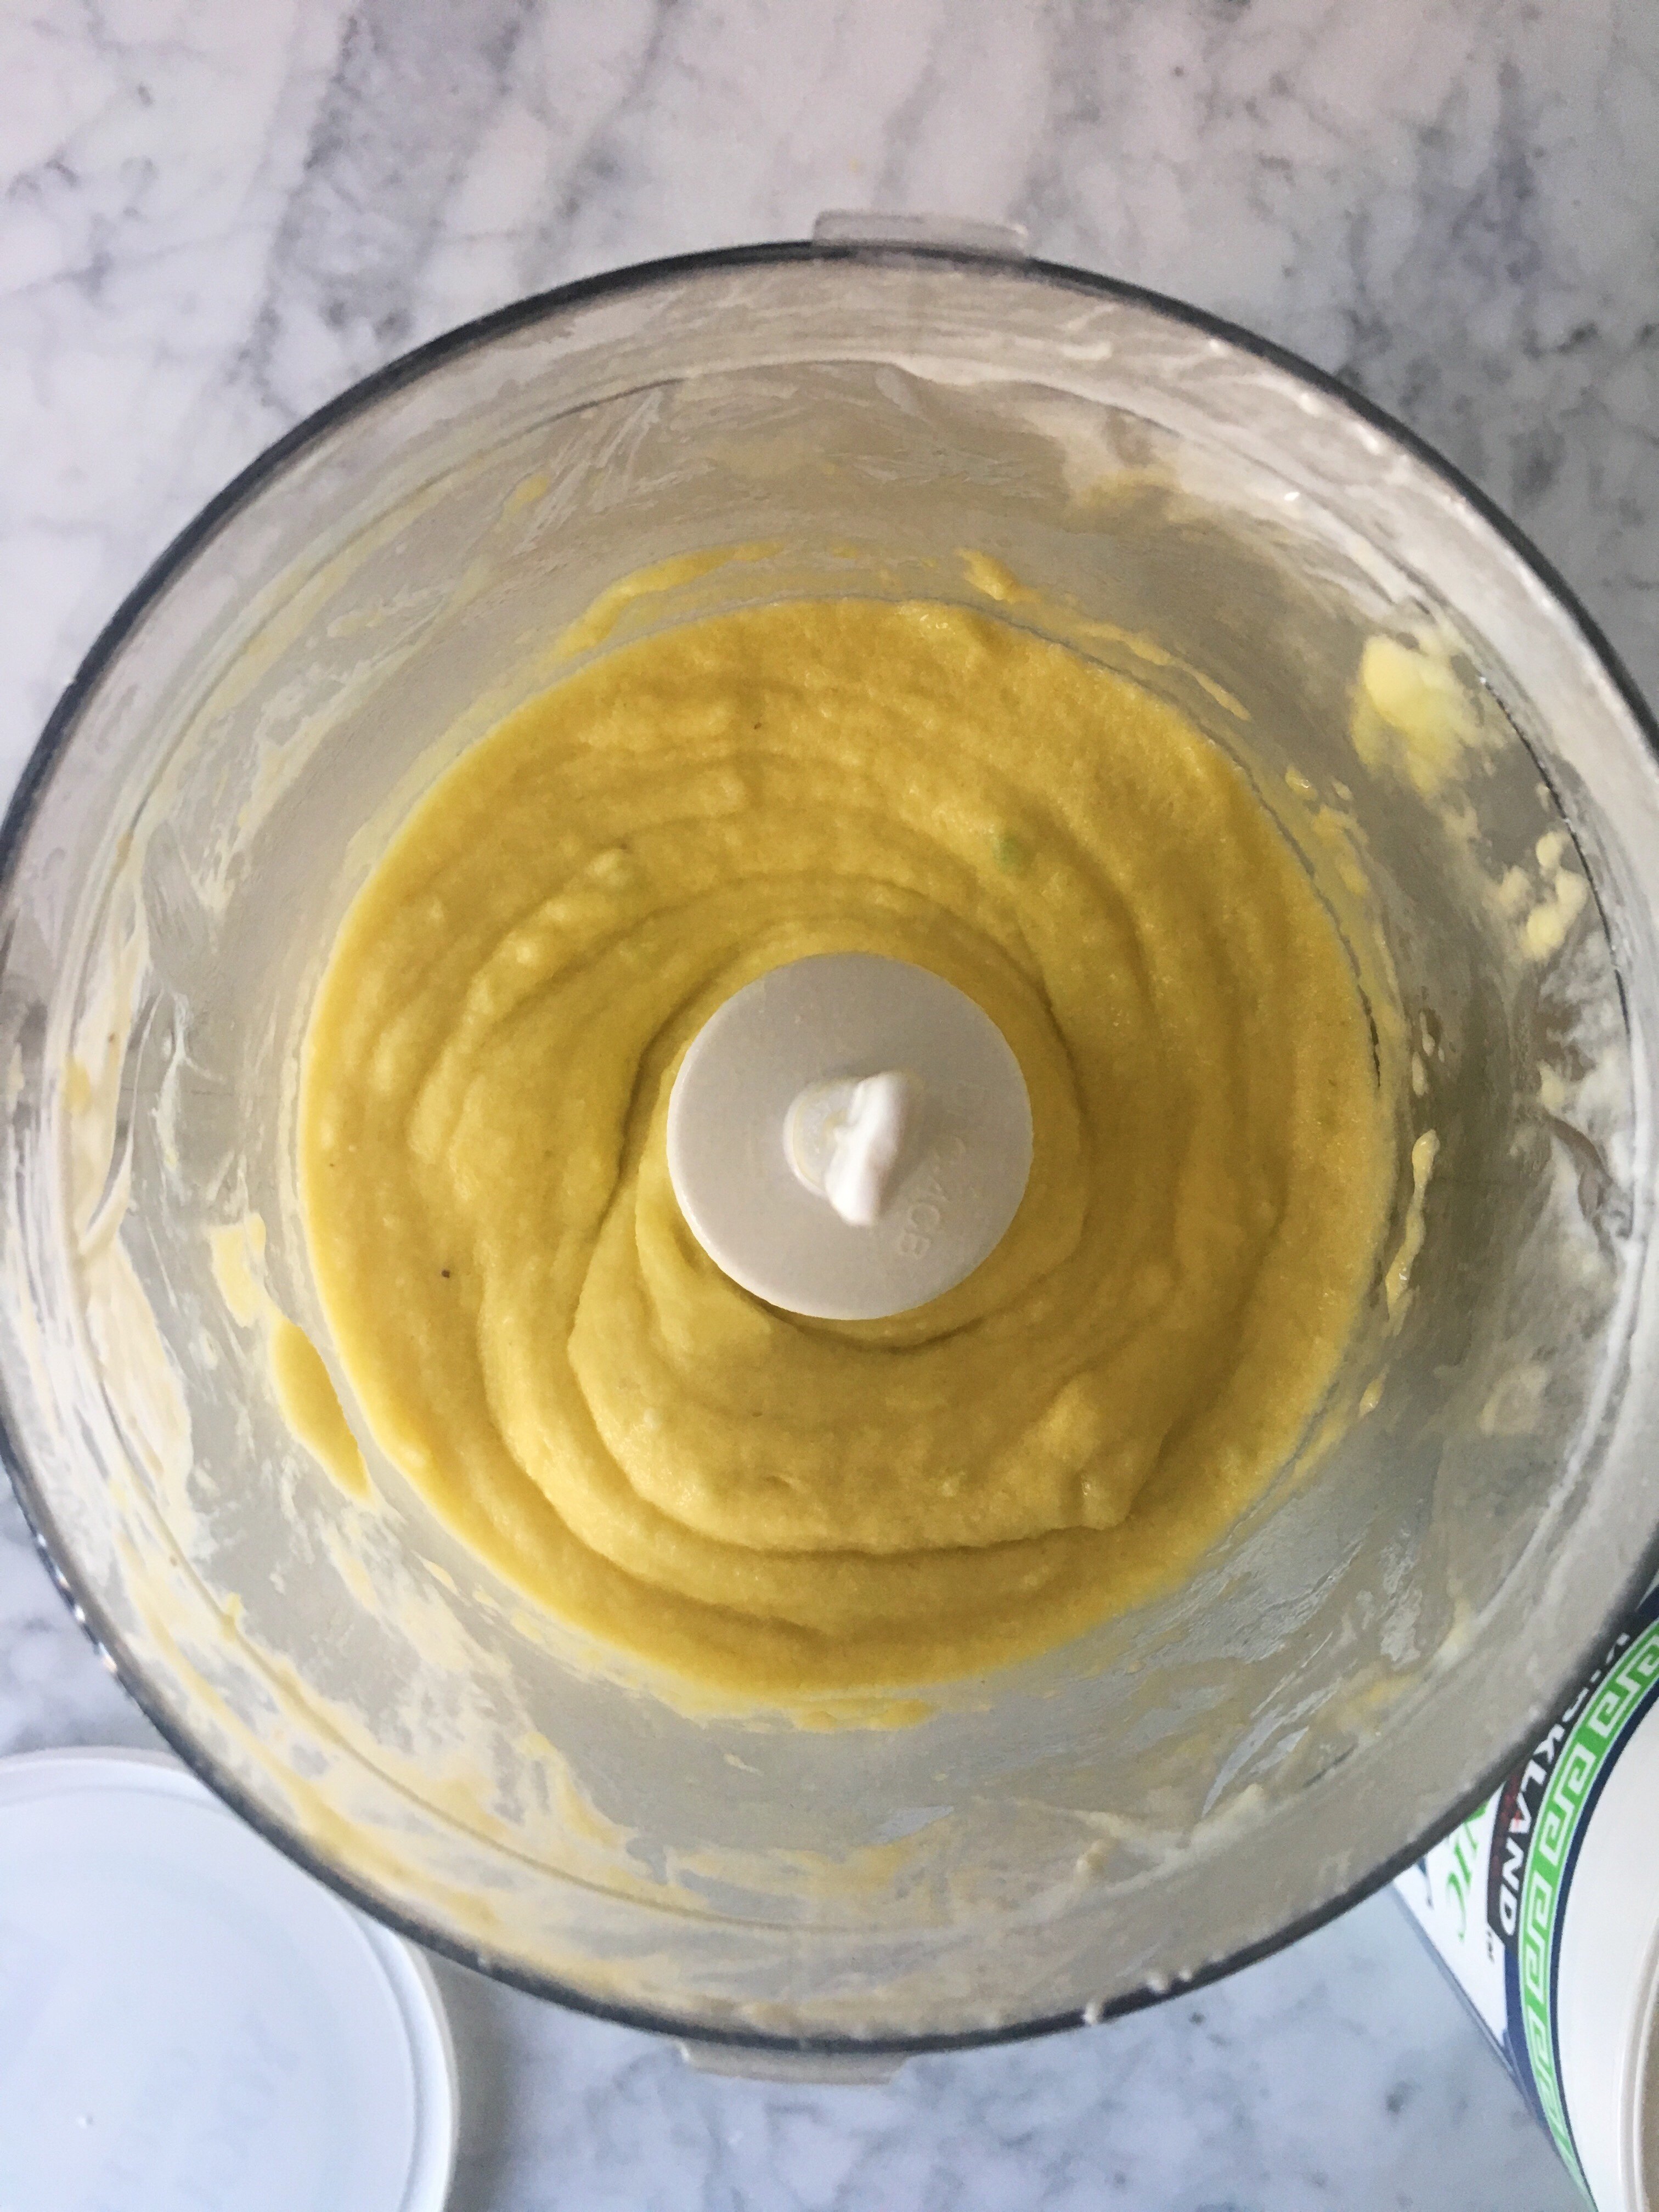 Blended mangoes and bananas that has a soft serve texture